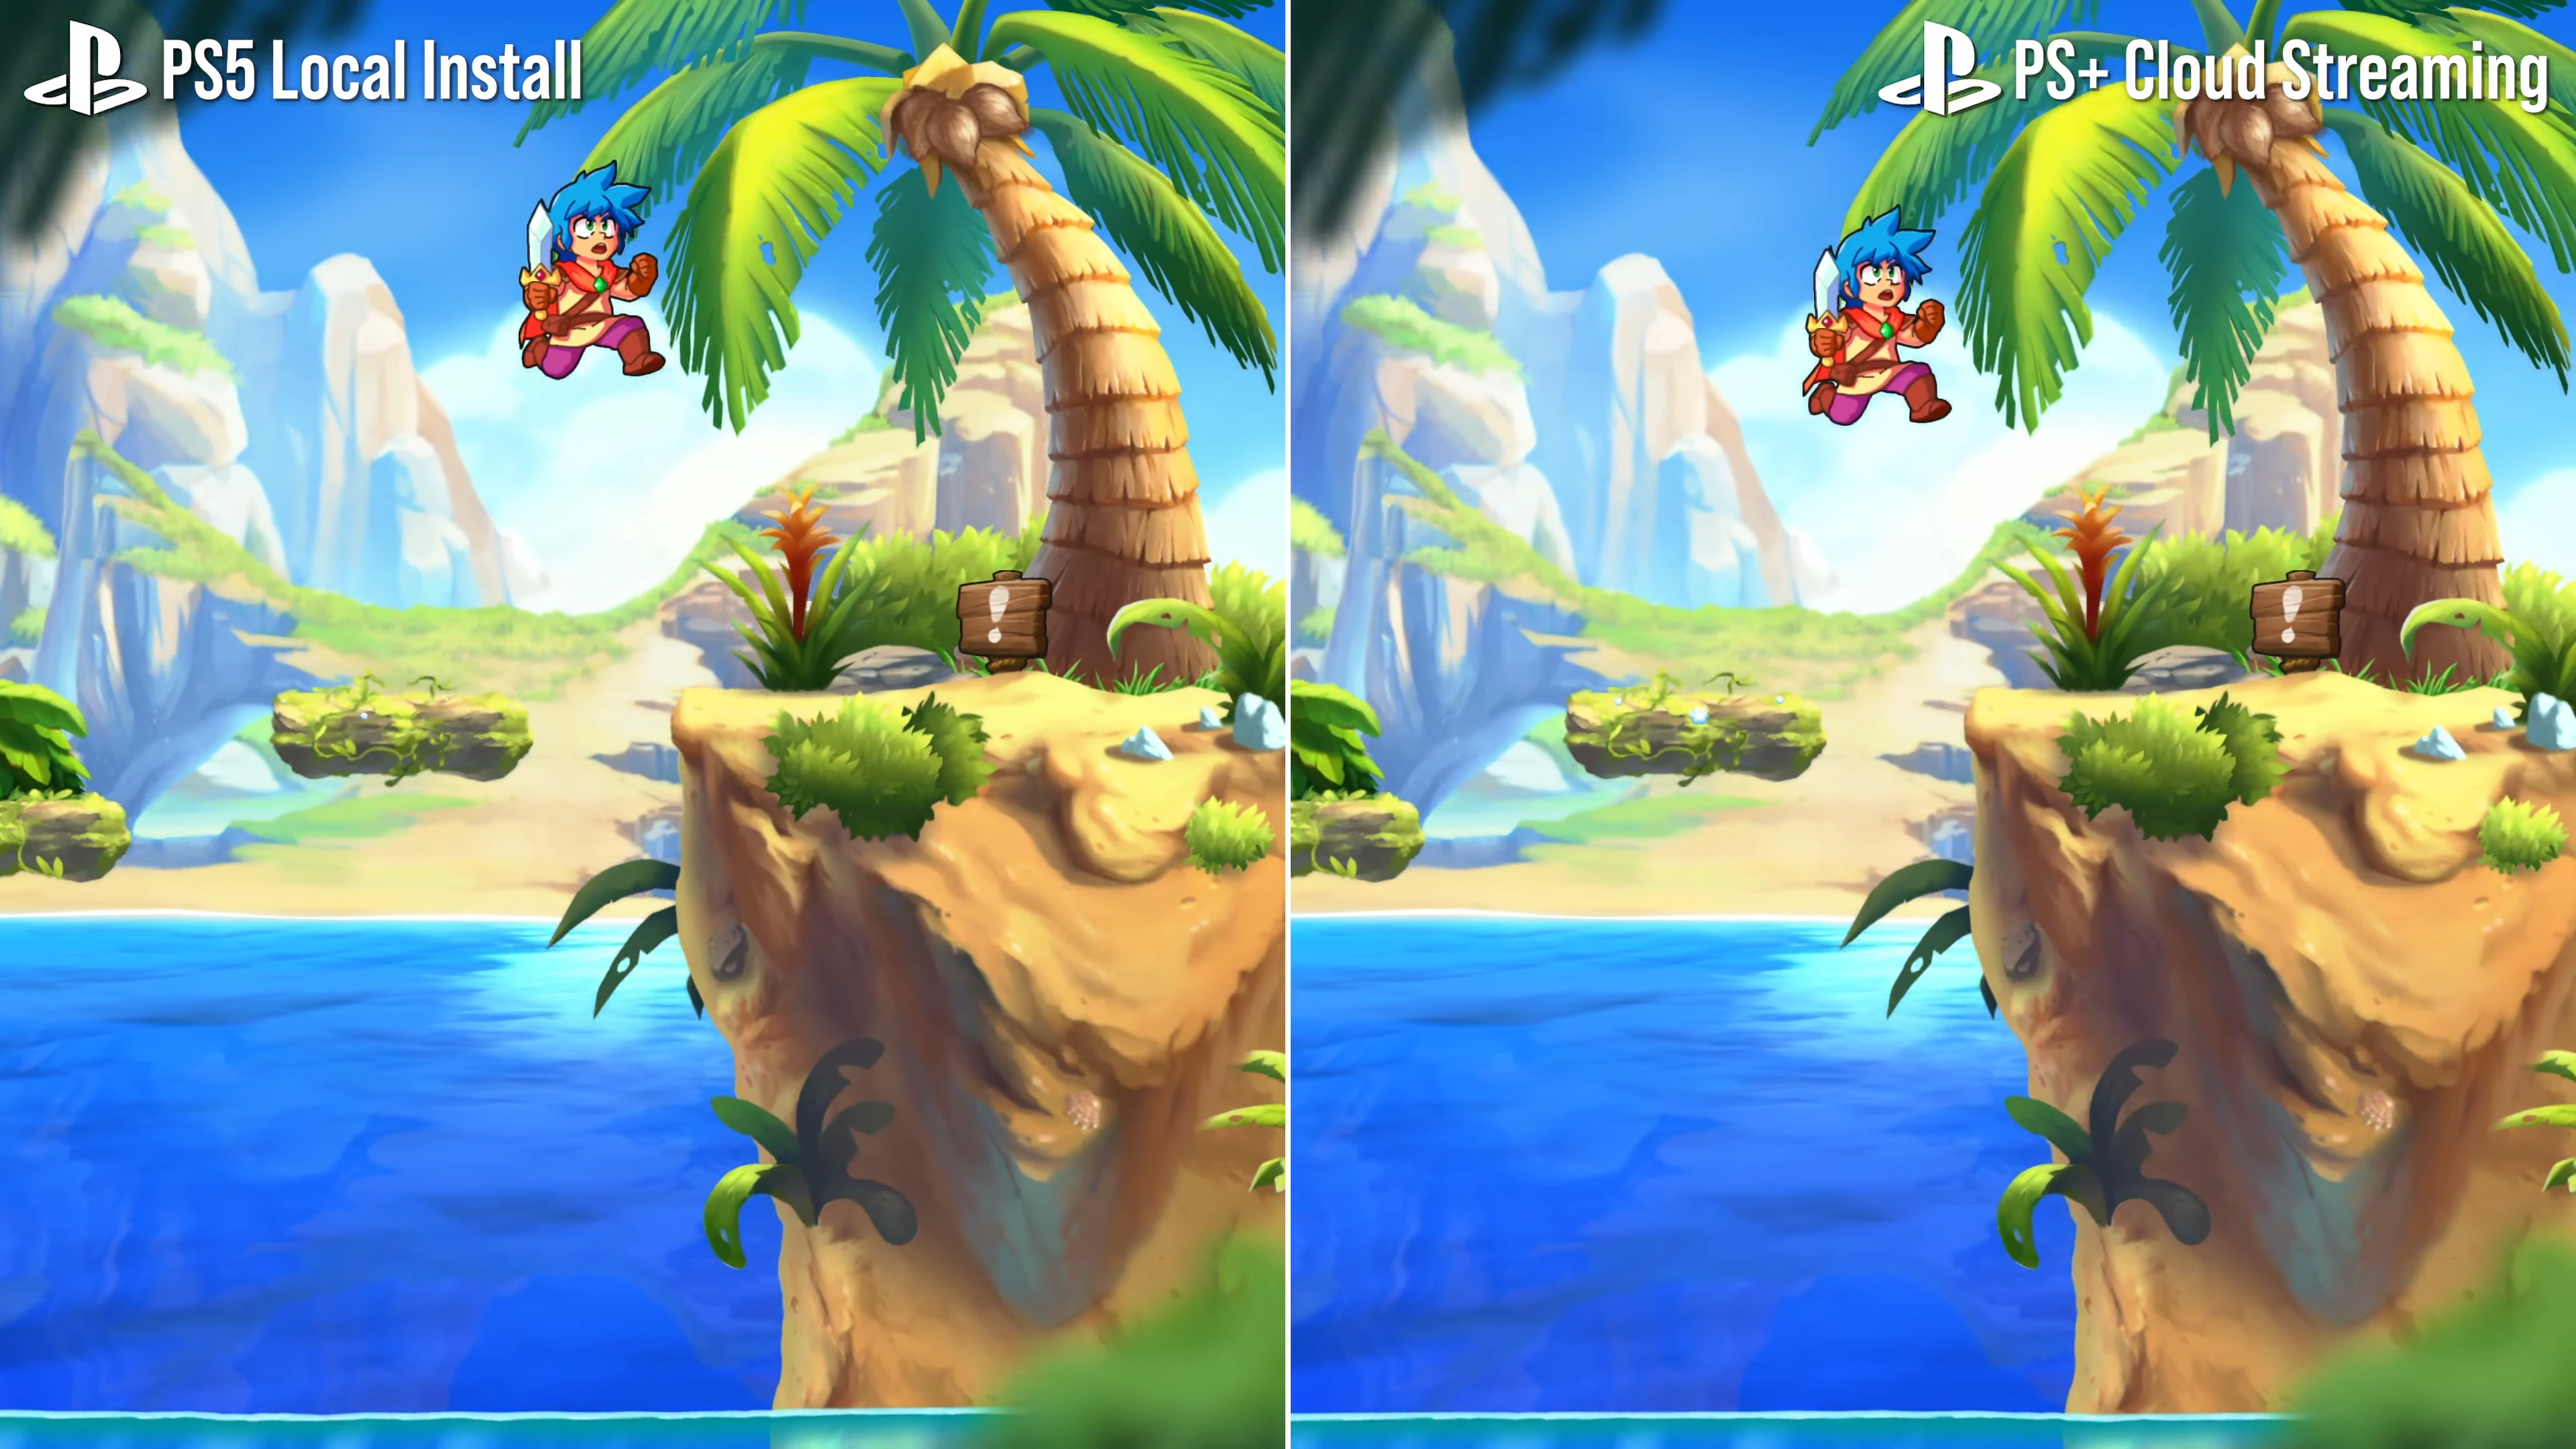 PS Plus cloud streaming vs native in a monster boy